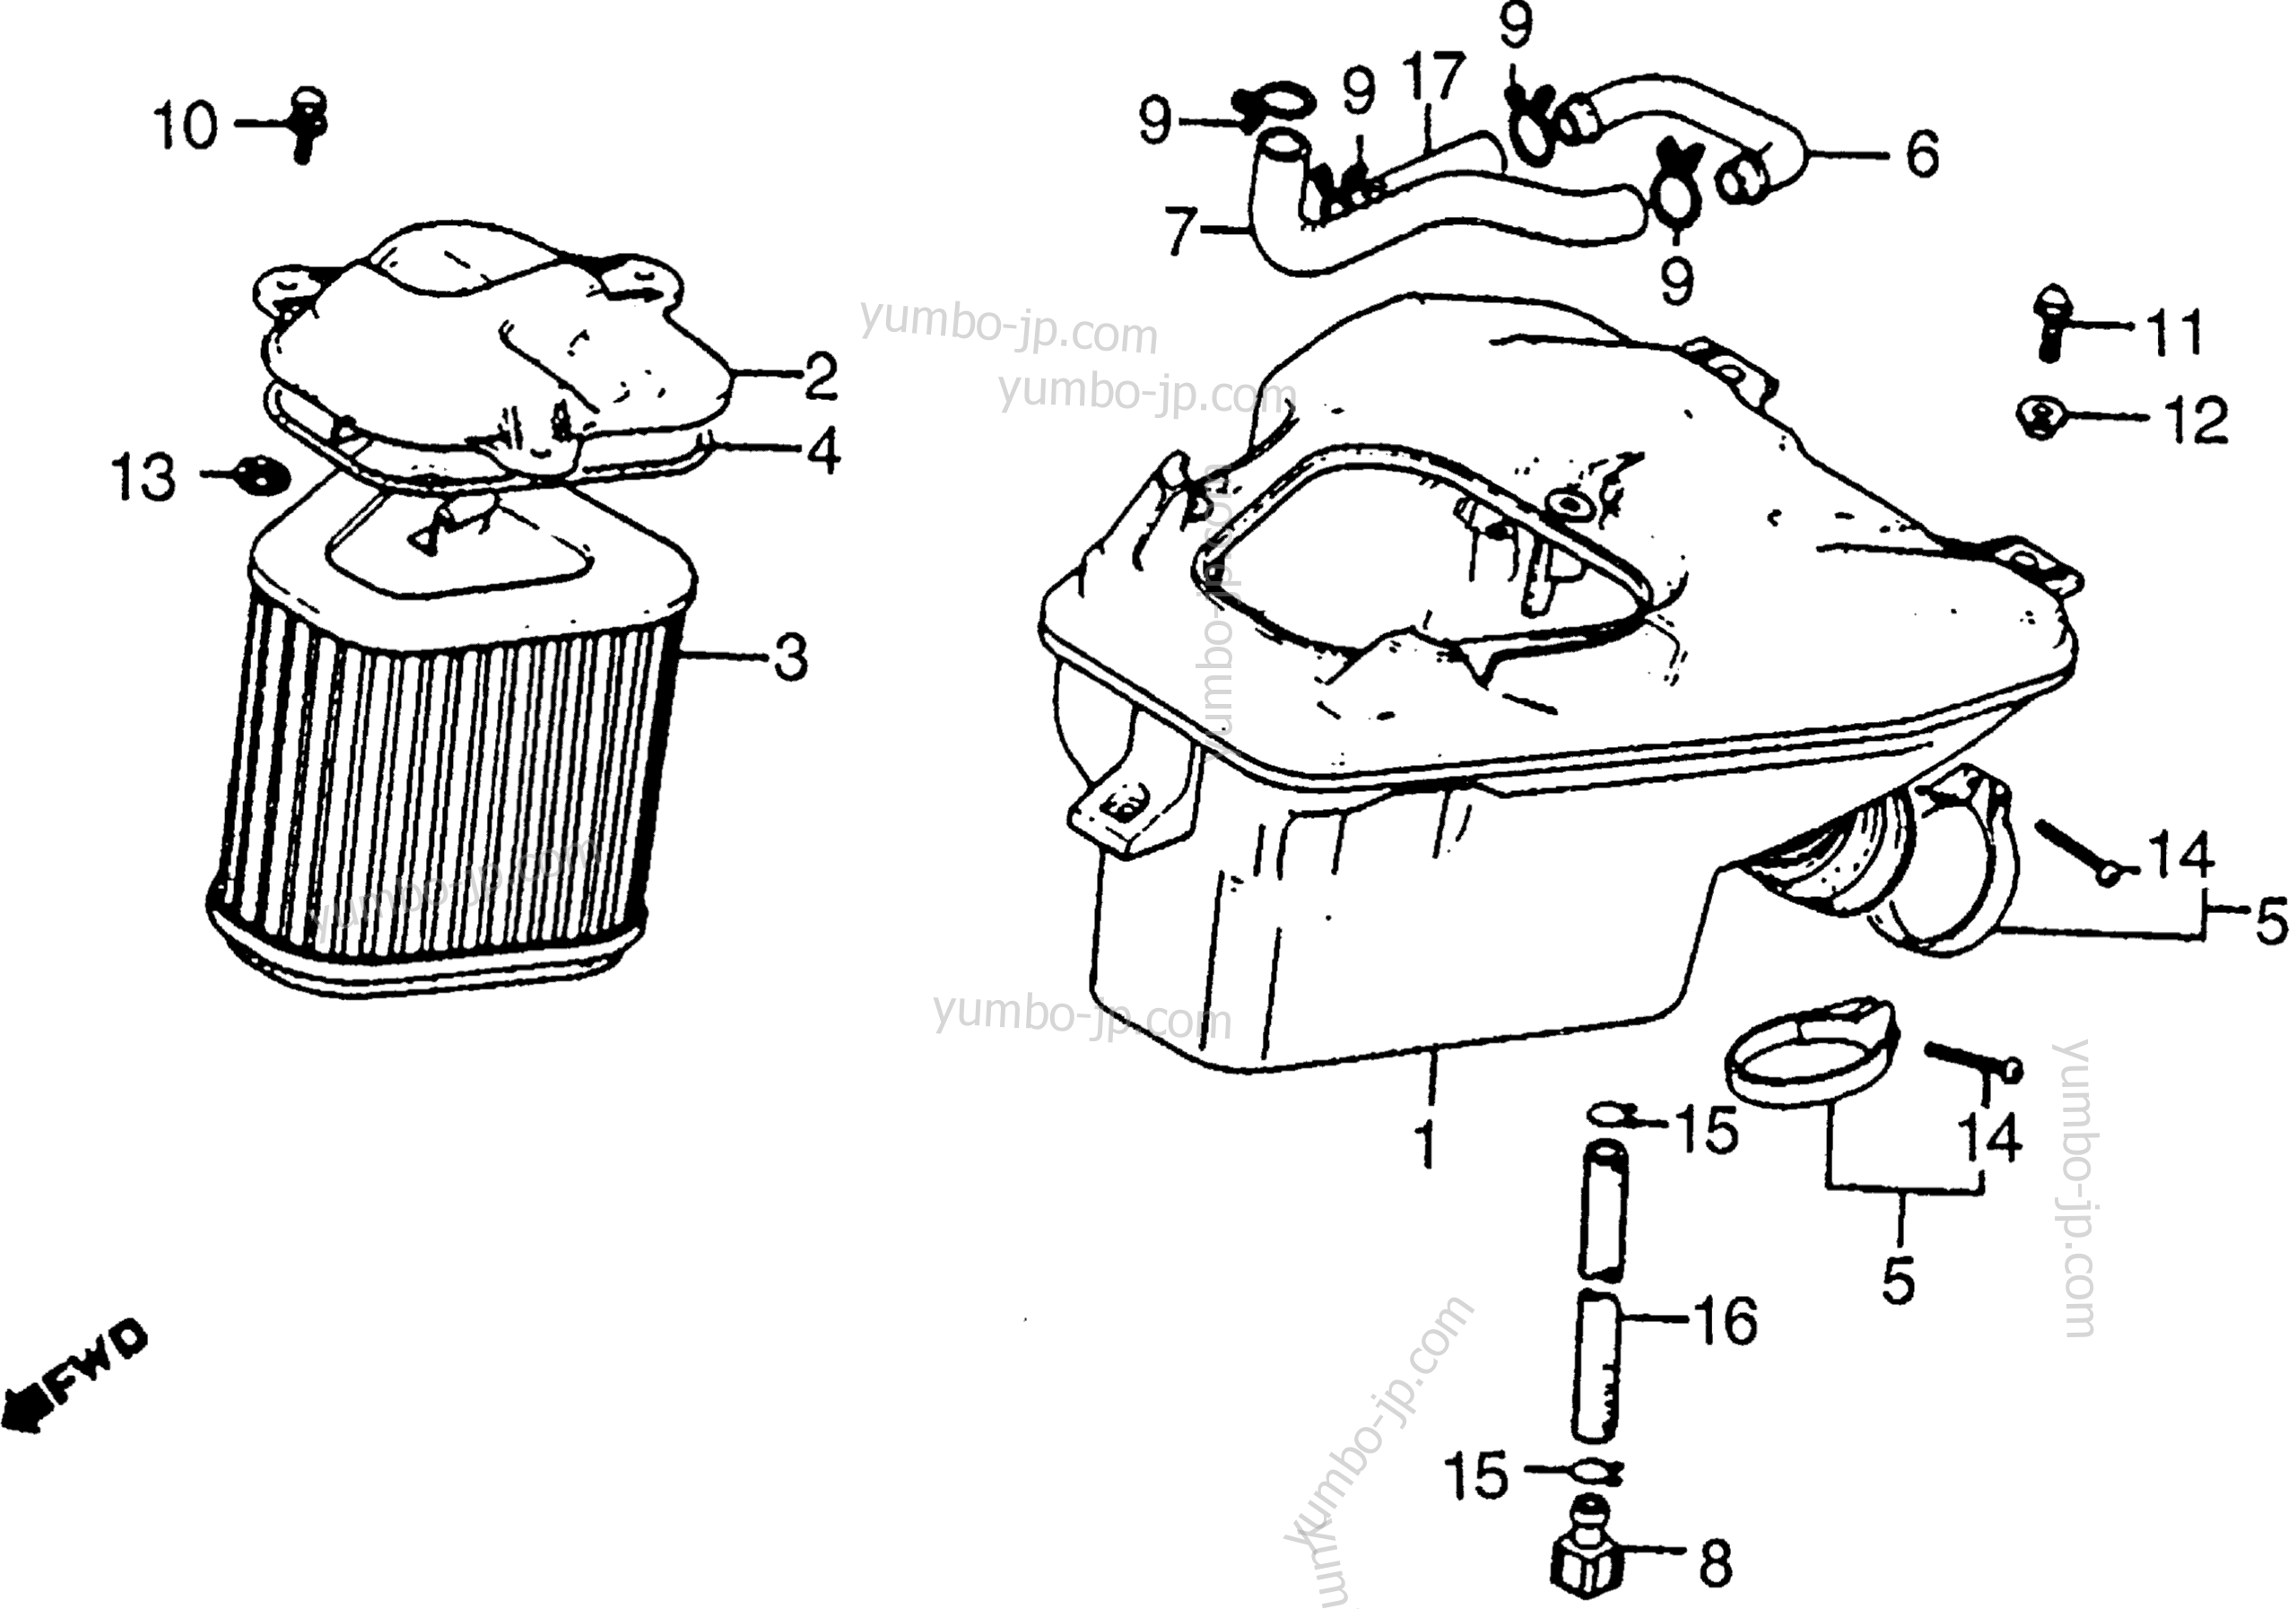 AIR CLEANER for motorcycles HONDA VT1100C A 1985 year